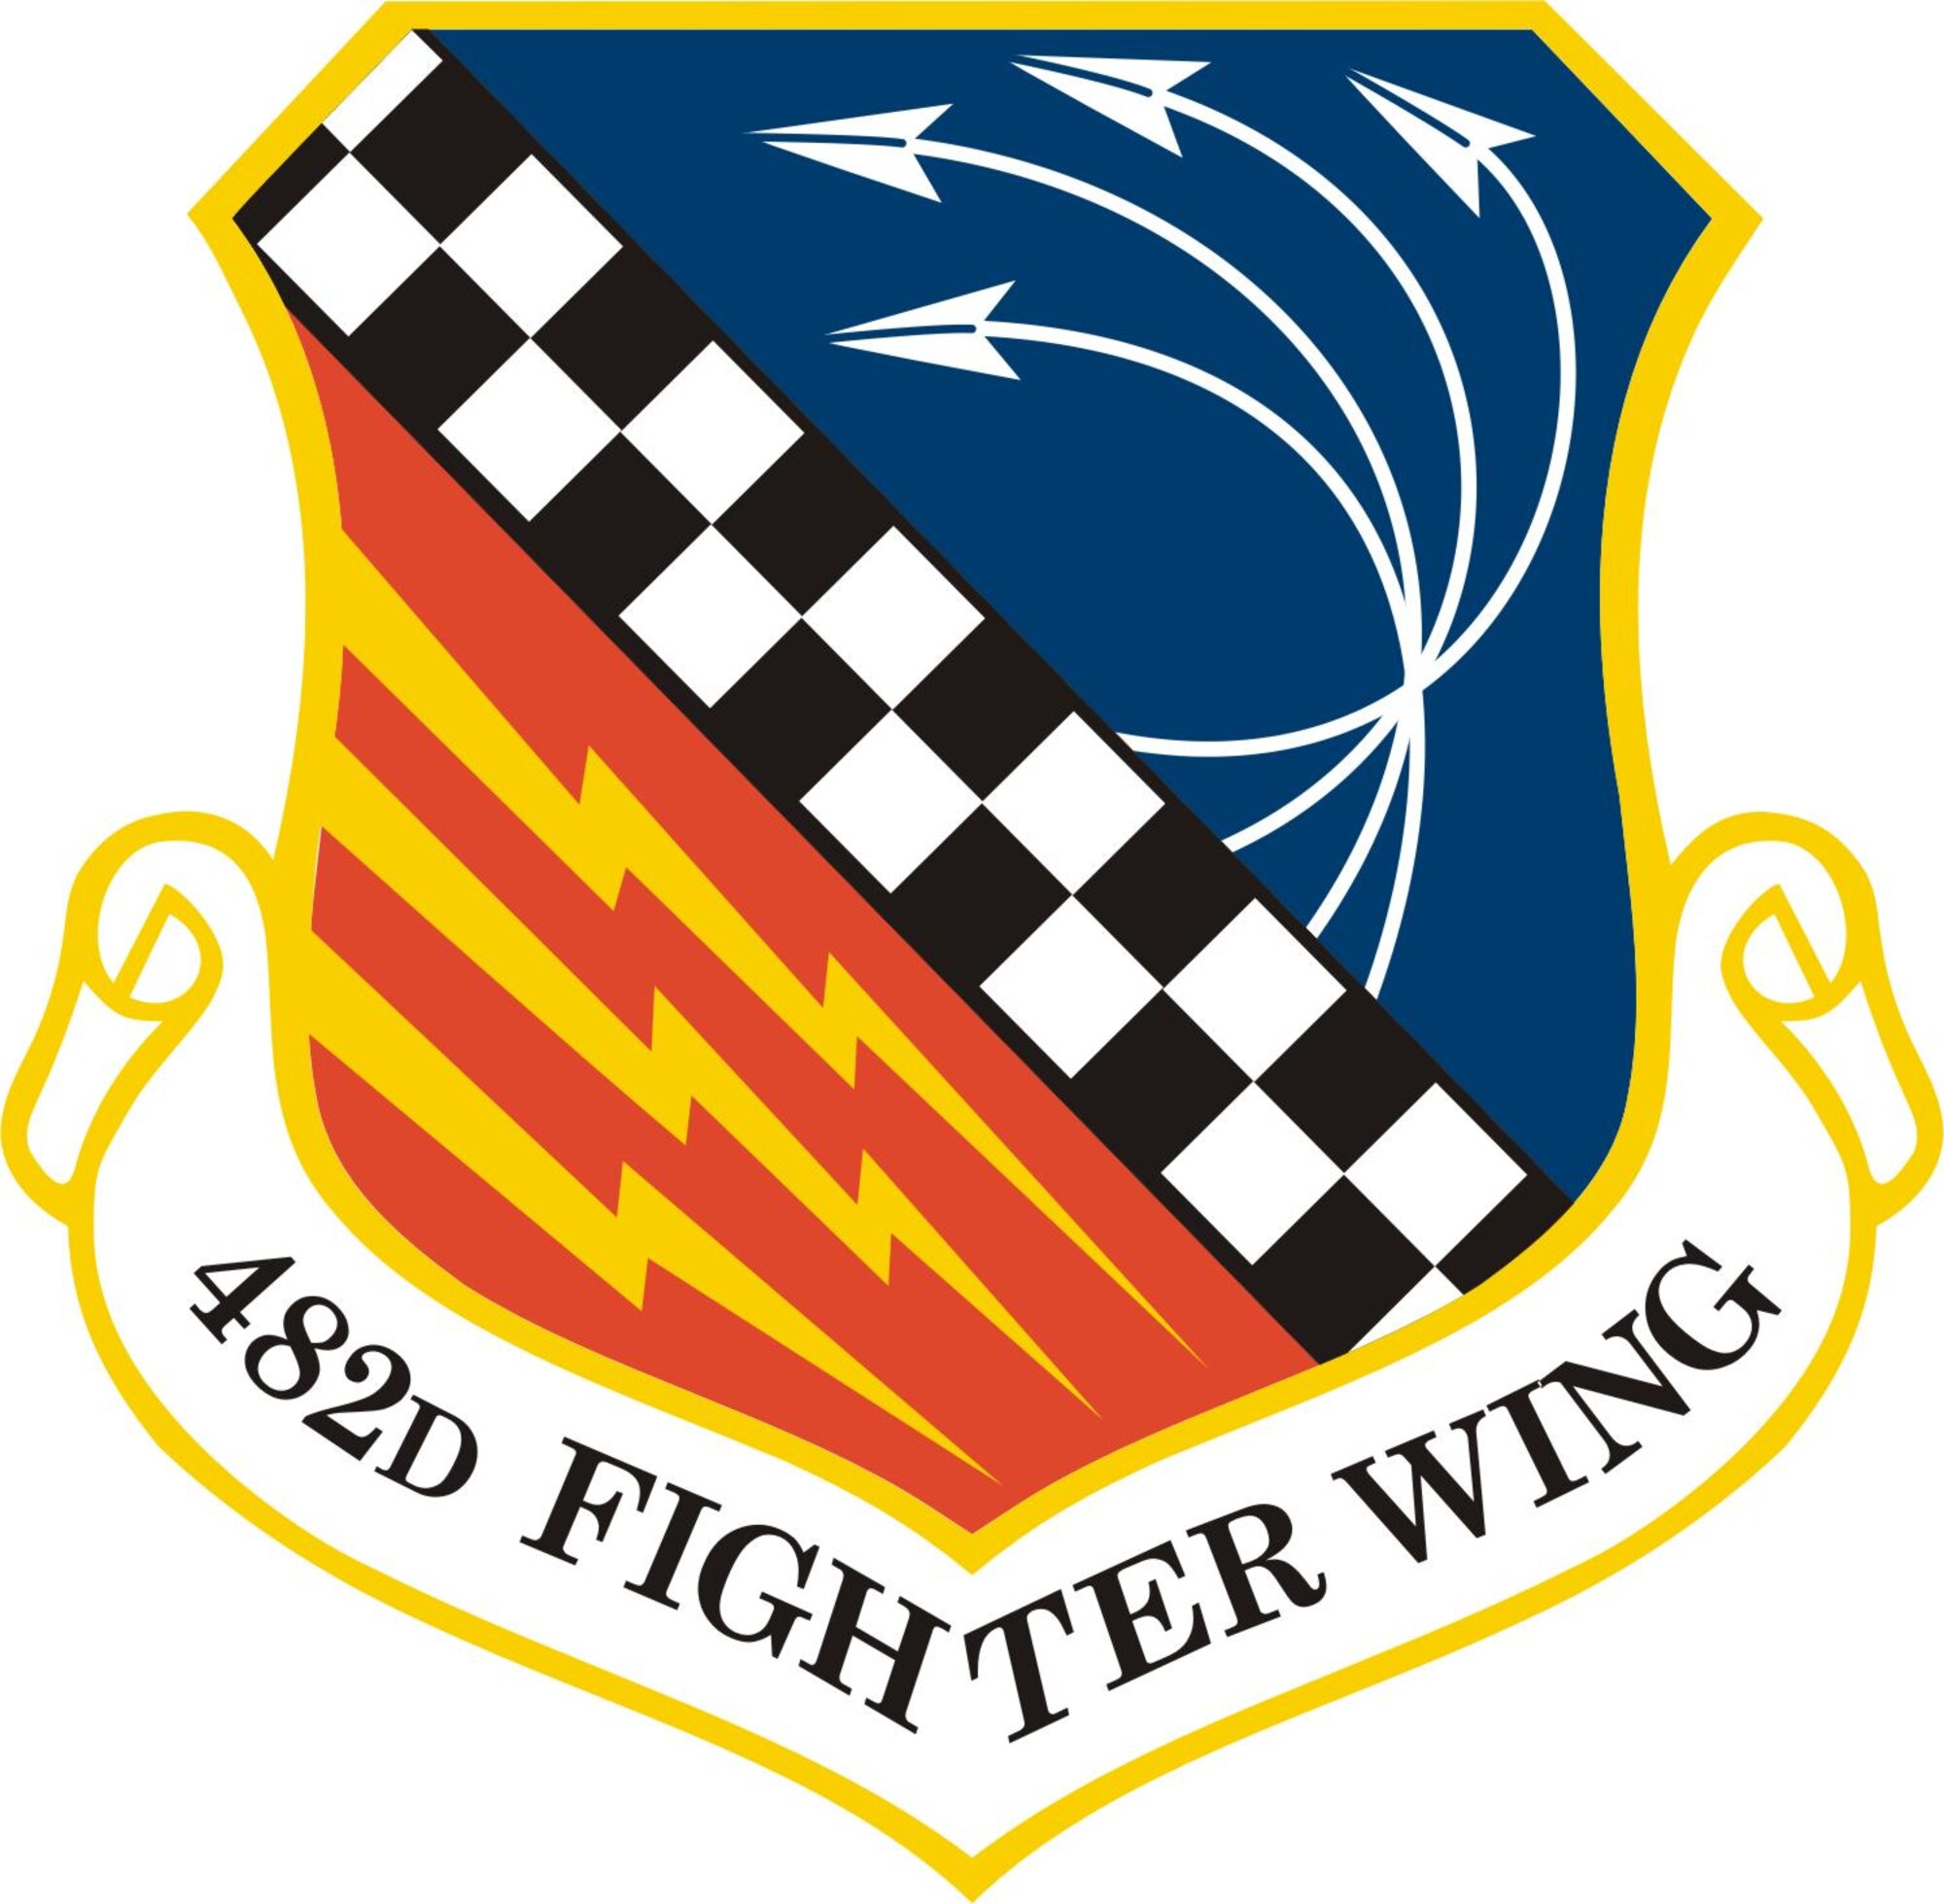 Current 482nd Fighter Wing emblem approved in November 1989. (U.S. Air Force graphic)